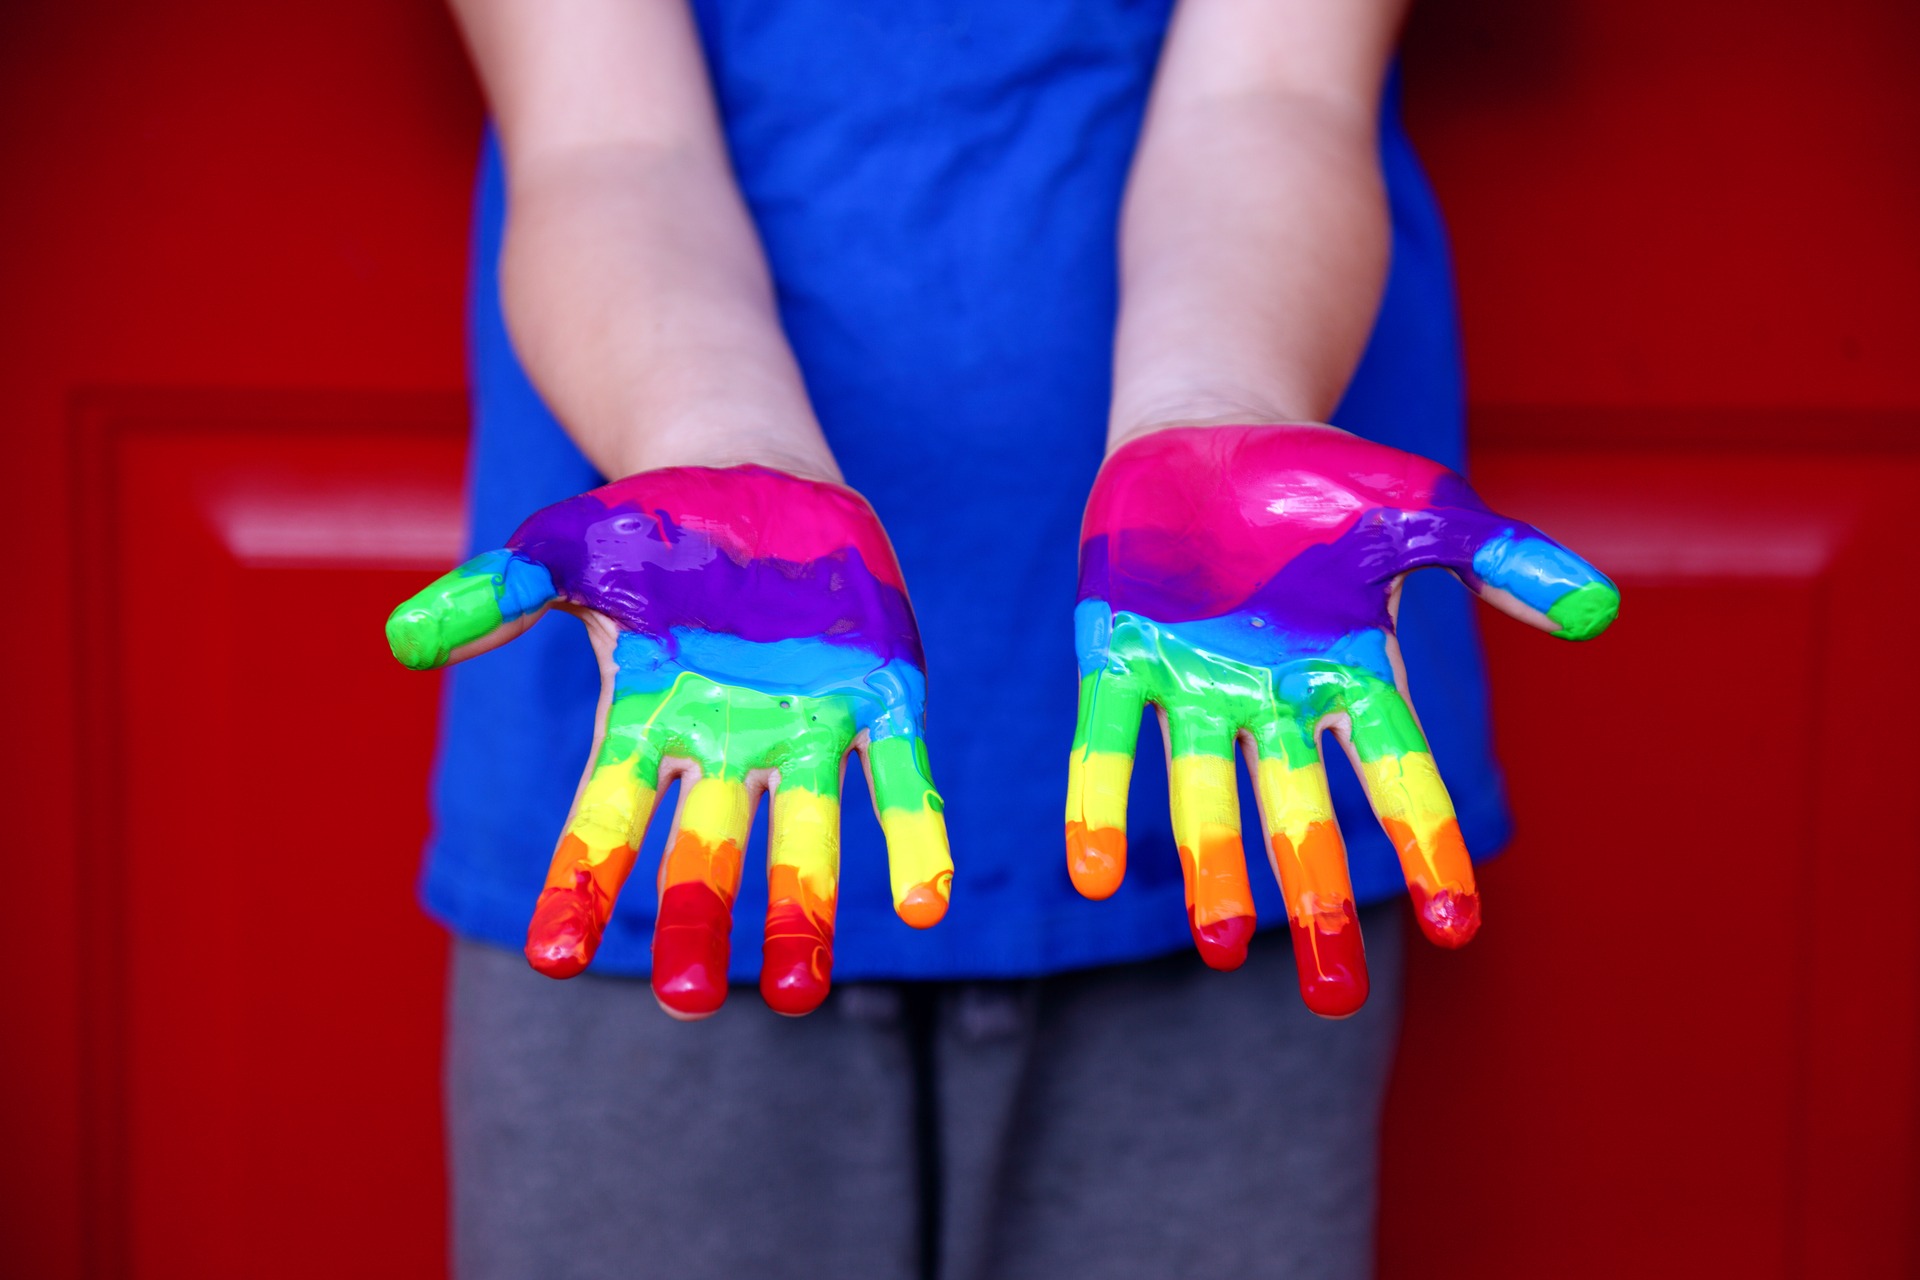 A picture of a pair of hands covered in paint, giving the effect of a rainbow.